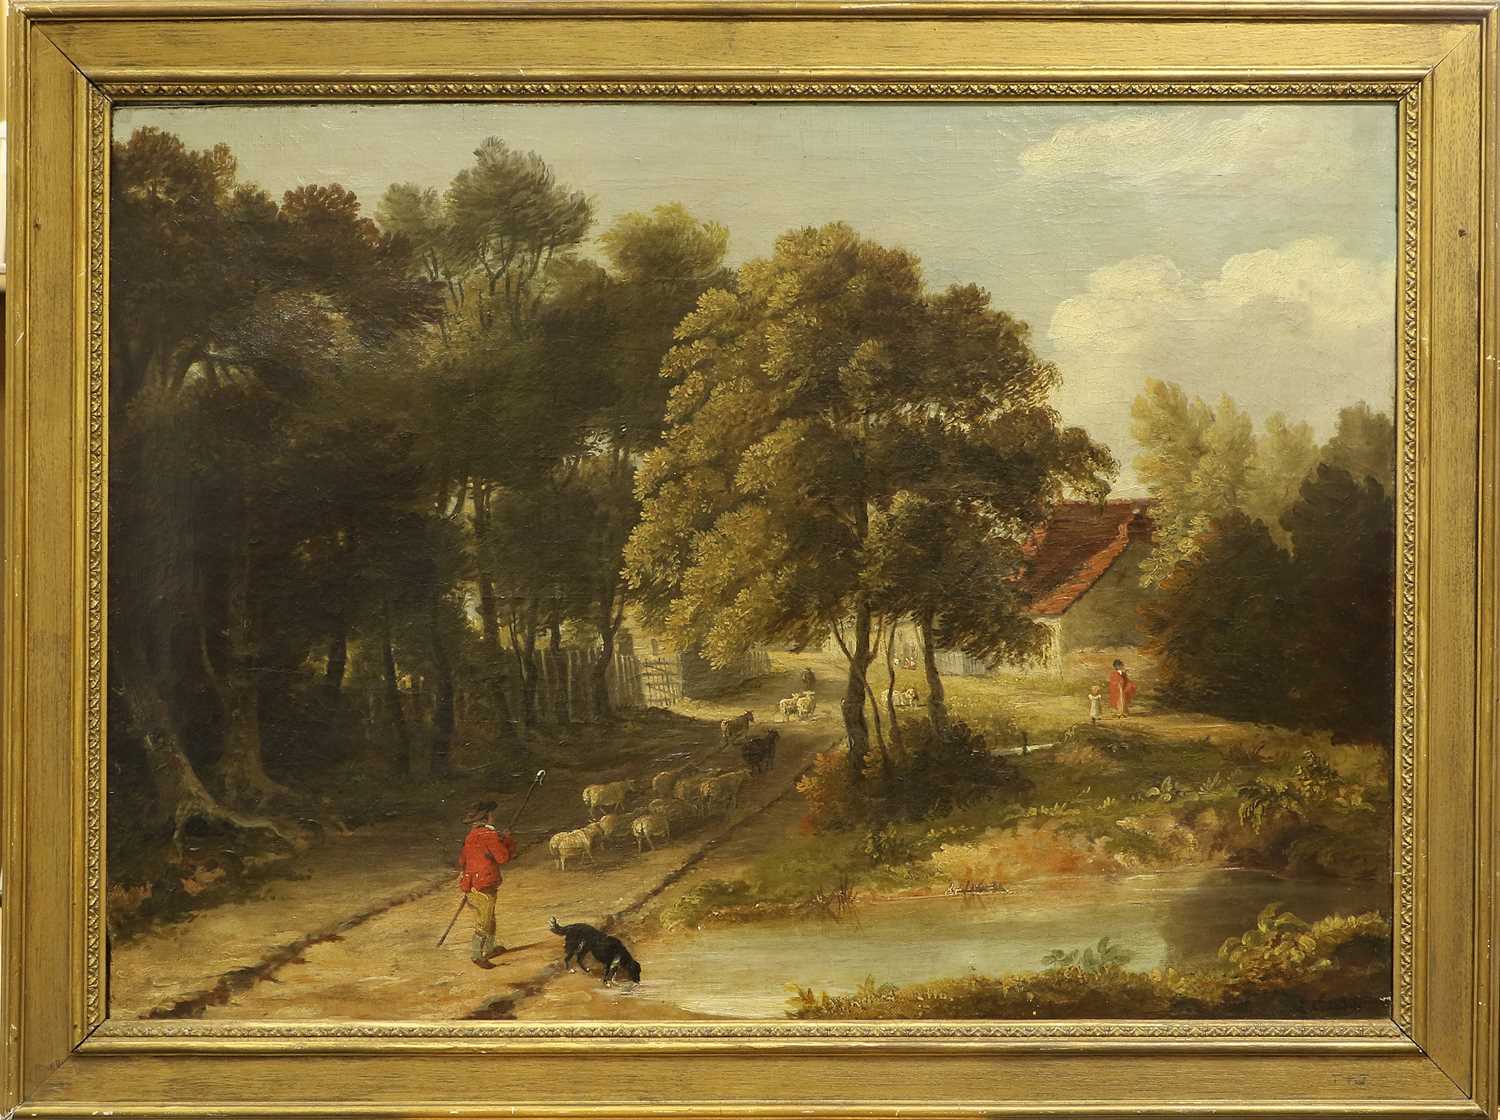 British School (Early 19th Century) A shepherd and his flock on a wooded country pathway - Image 2 of 3